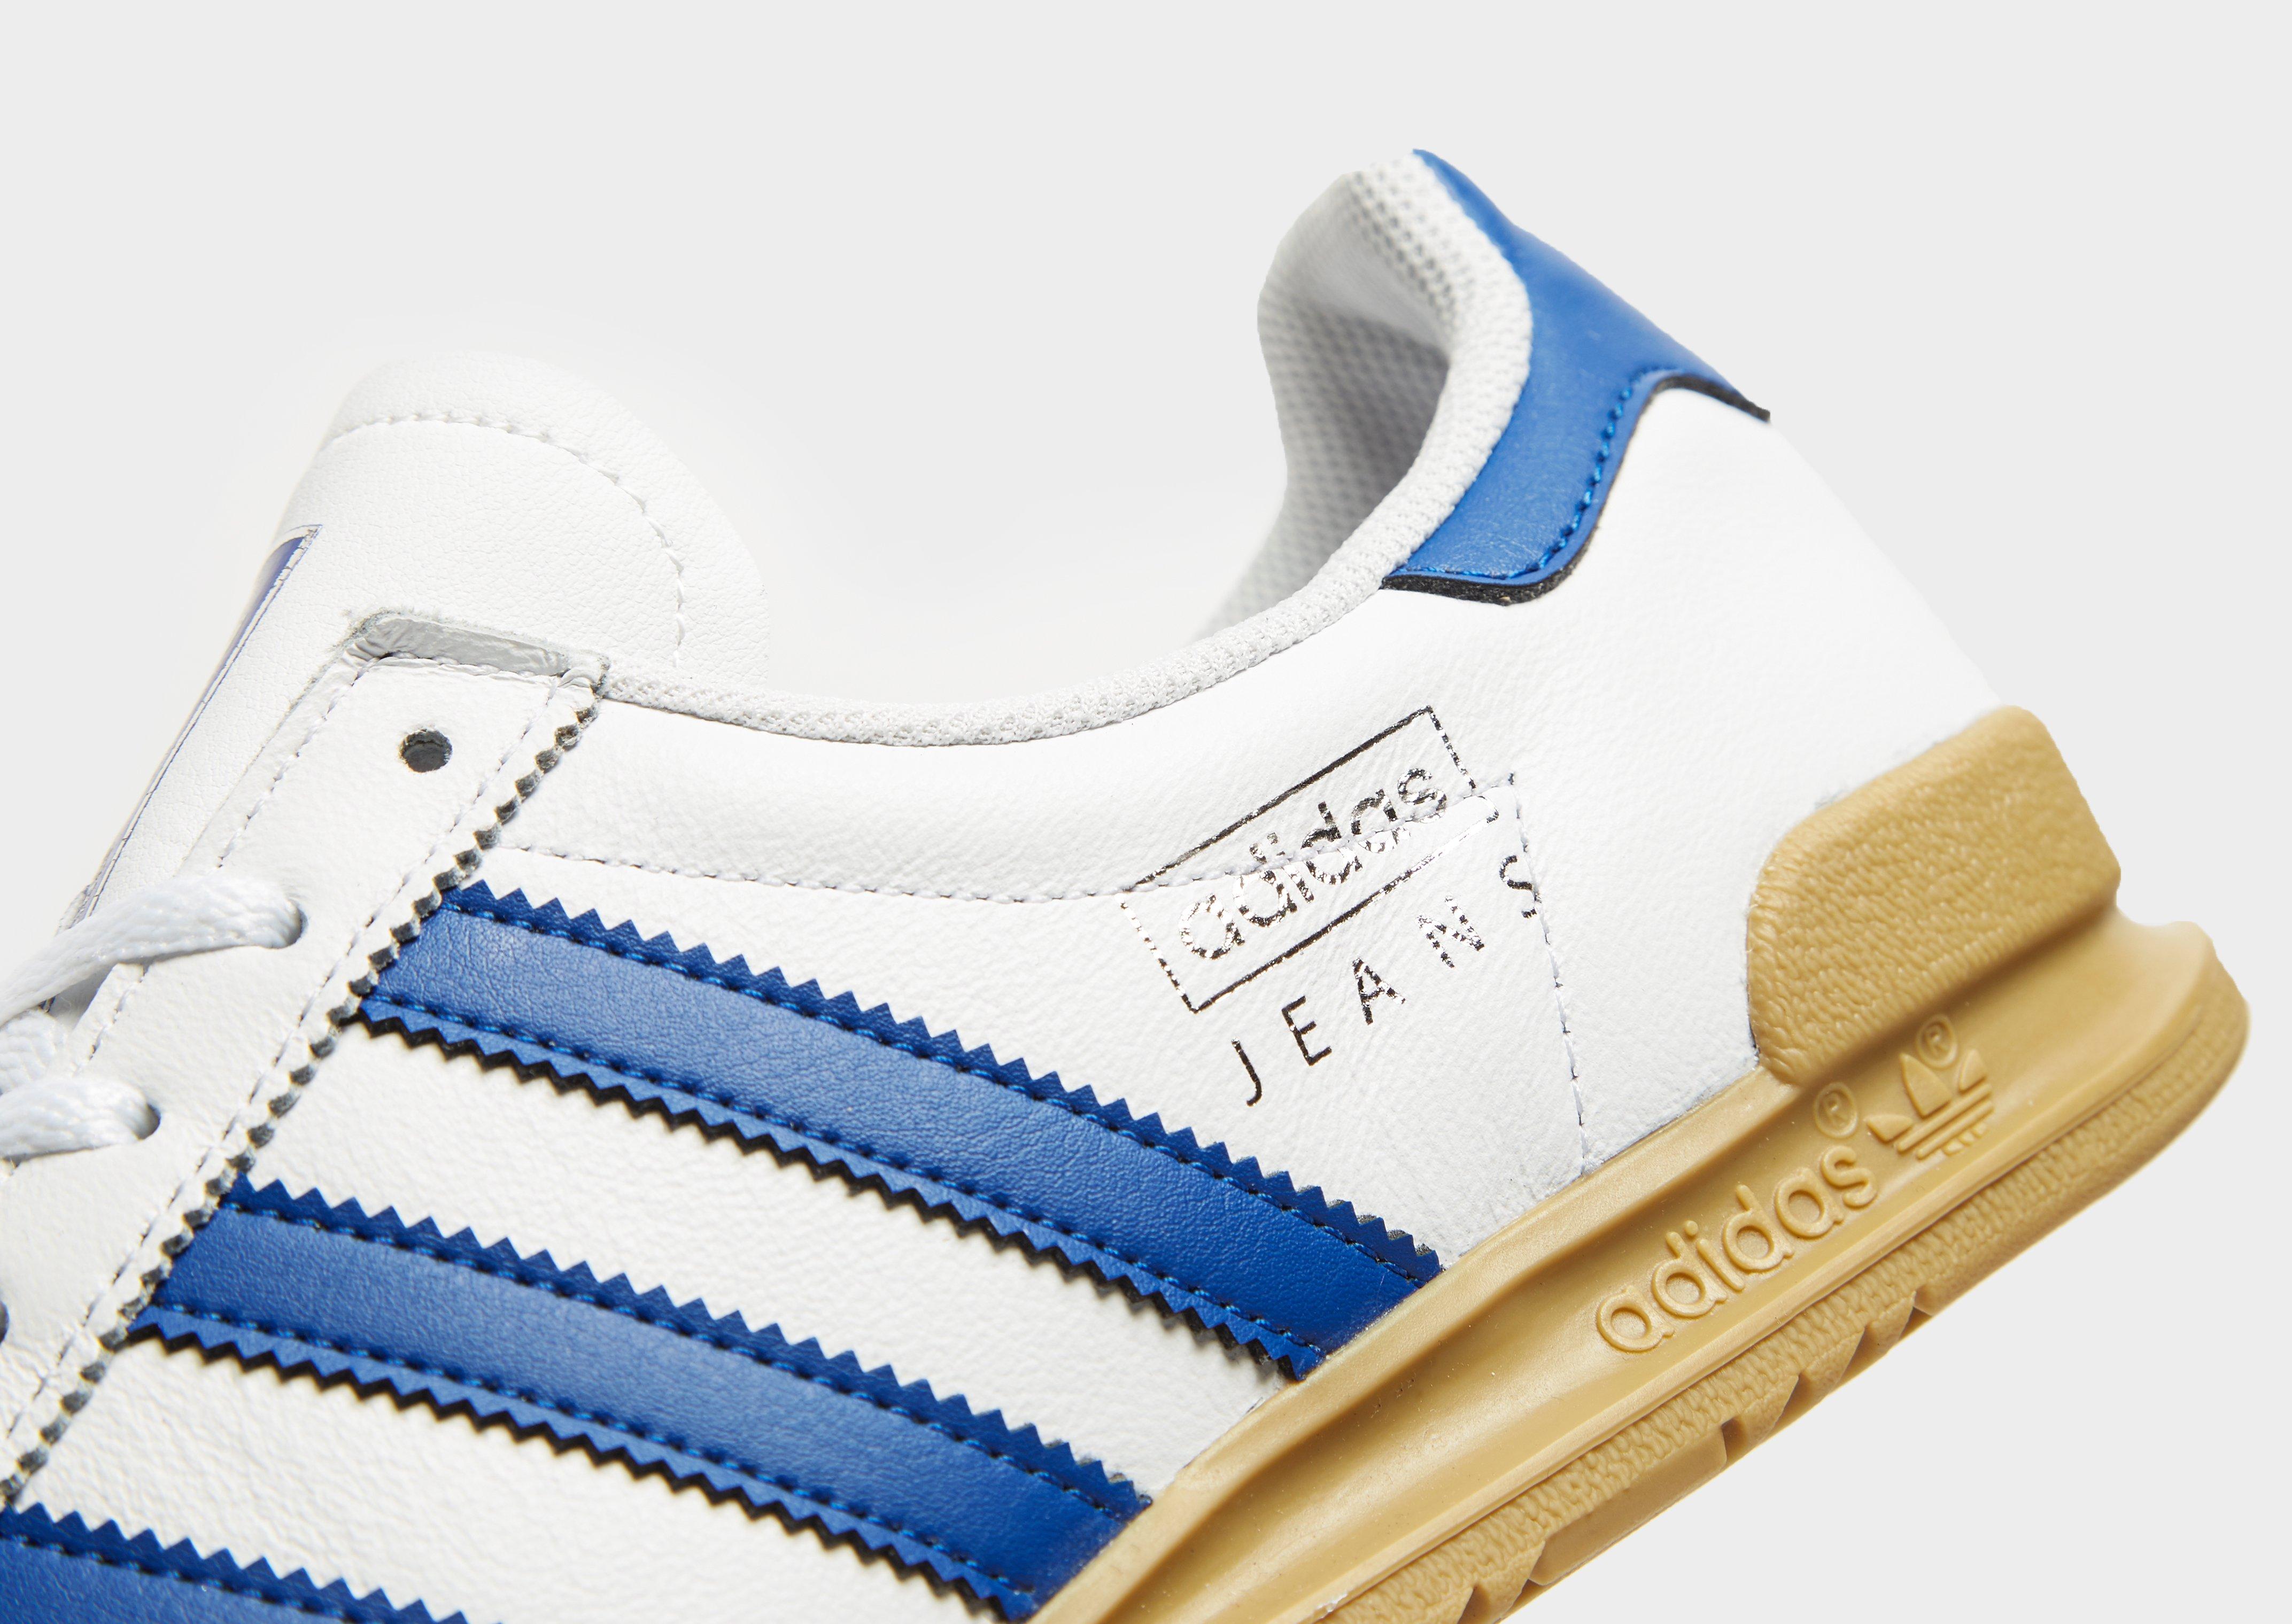 adidas jeans trainers white and blue